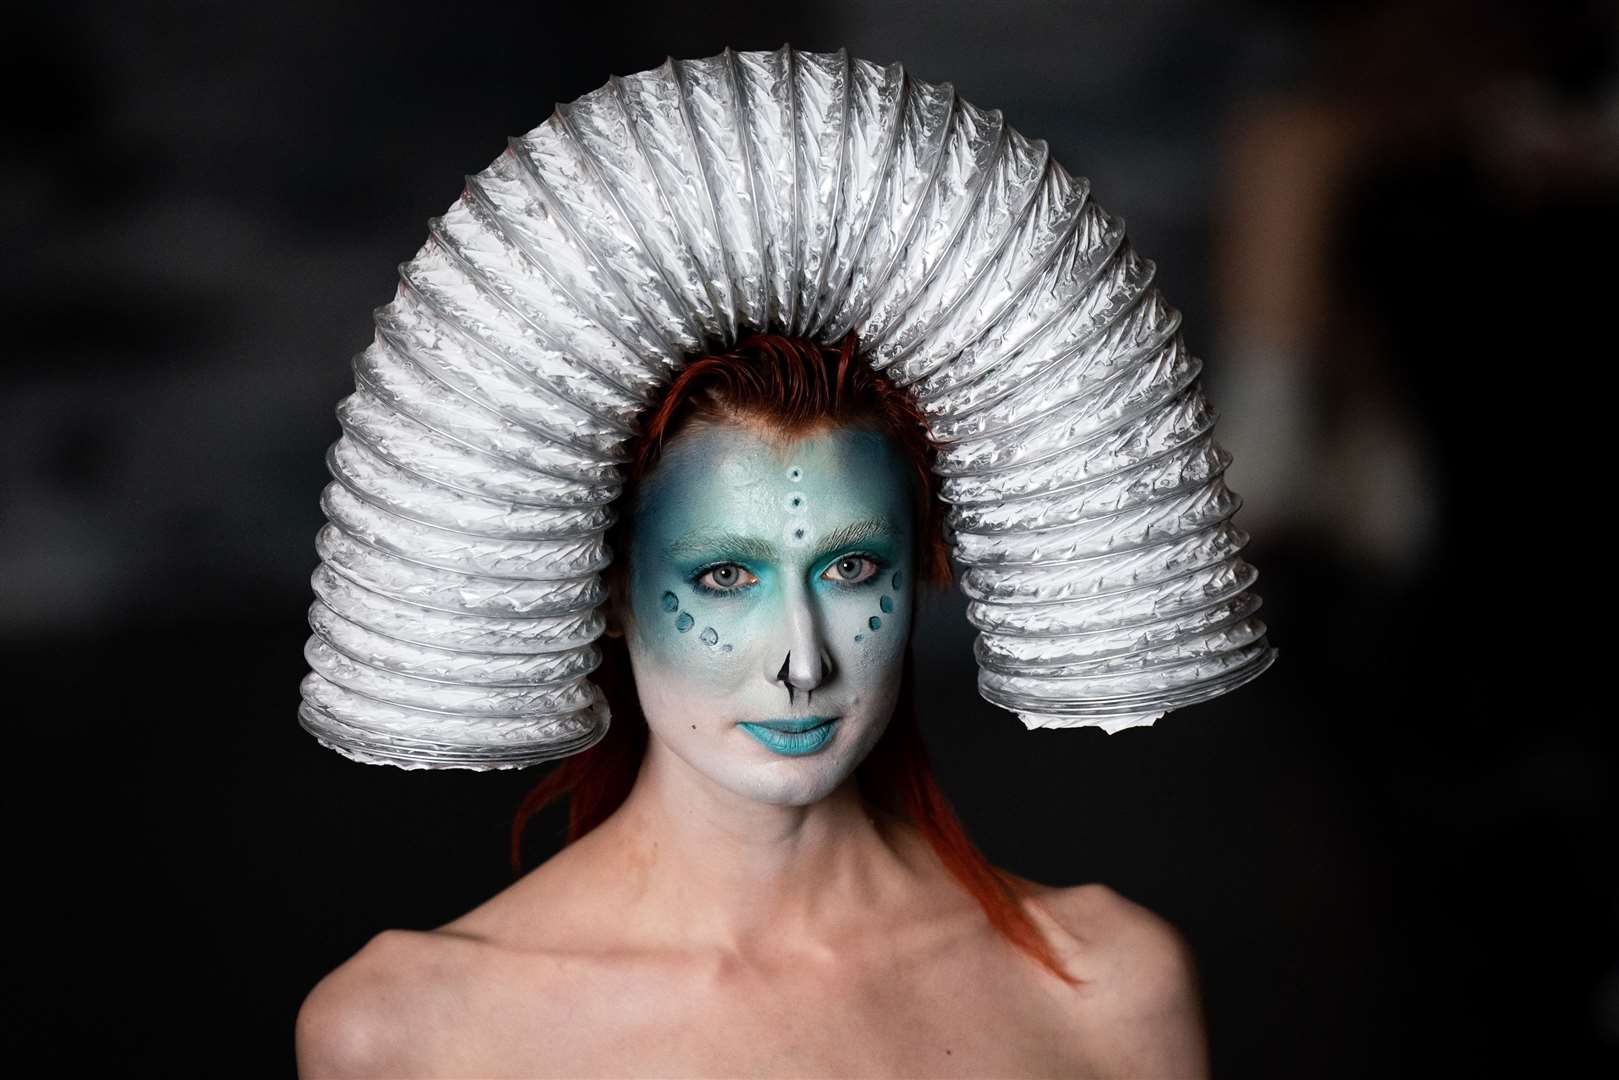 Make-up was eclectic at the fashion show (Aaron Chown/PA)